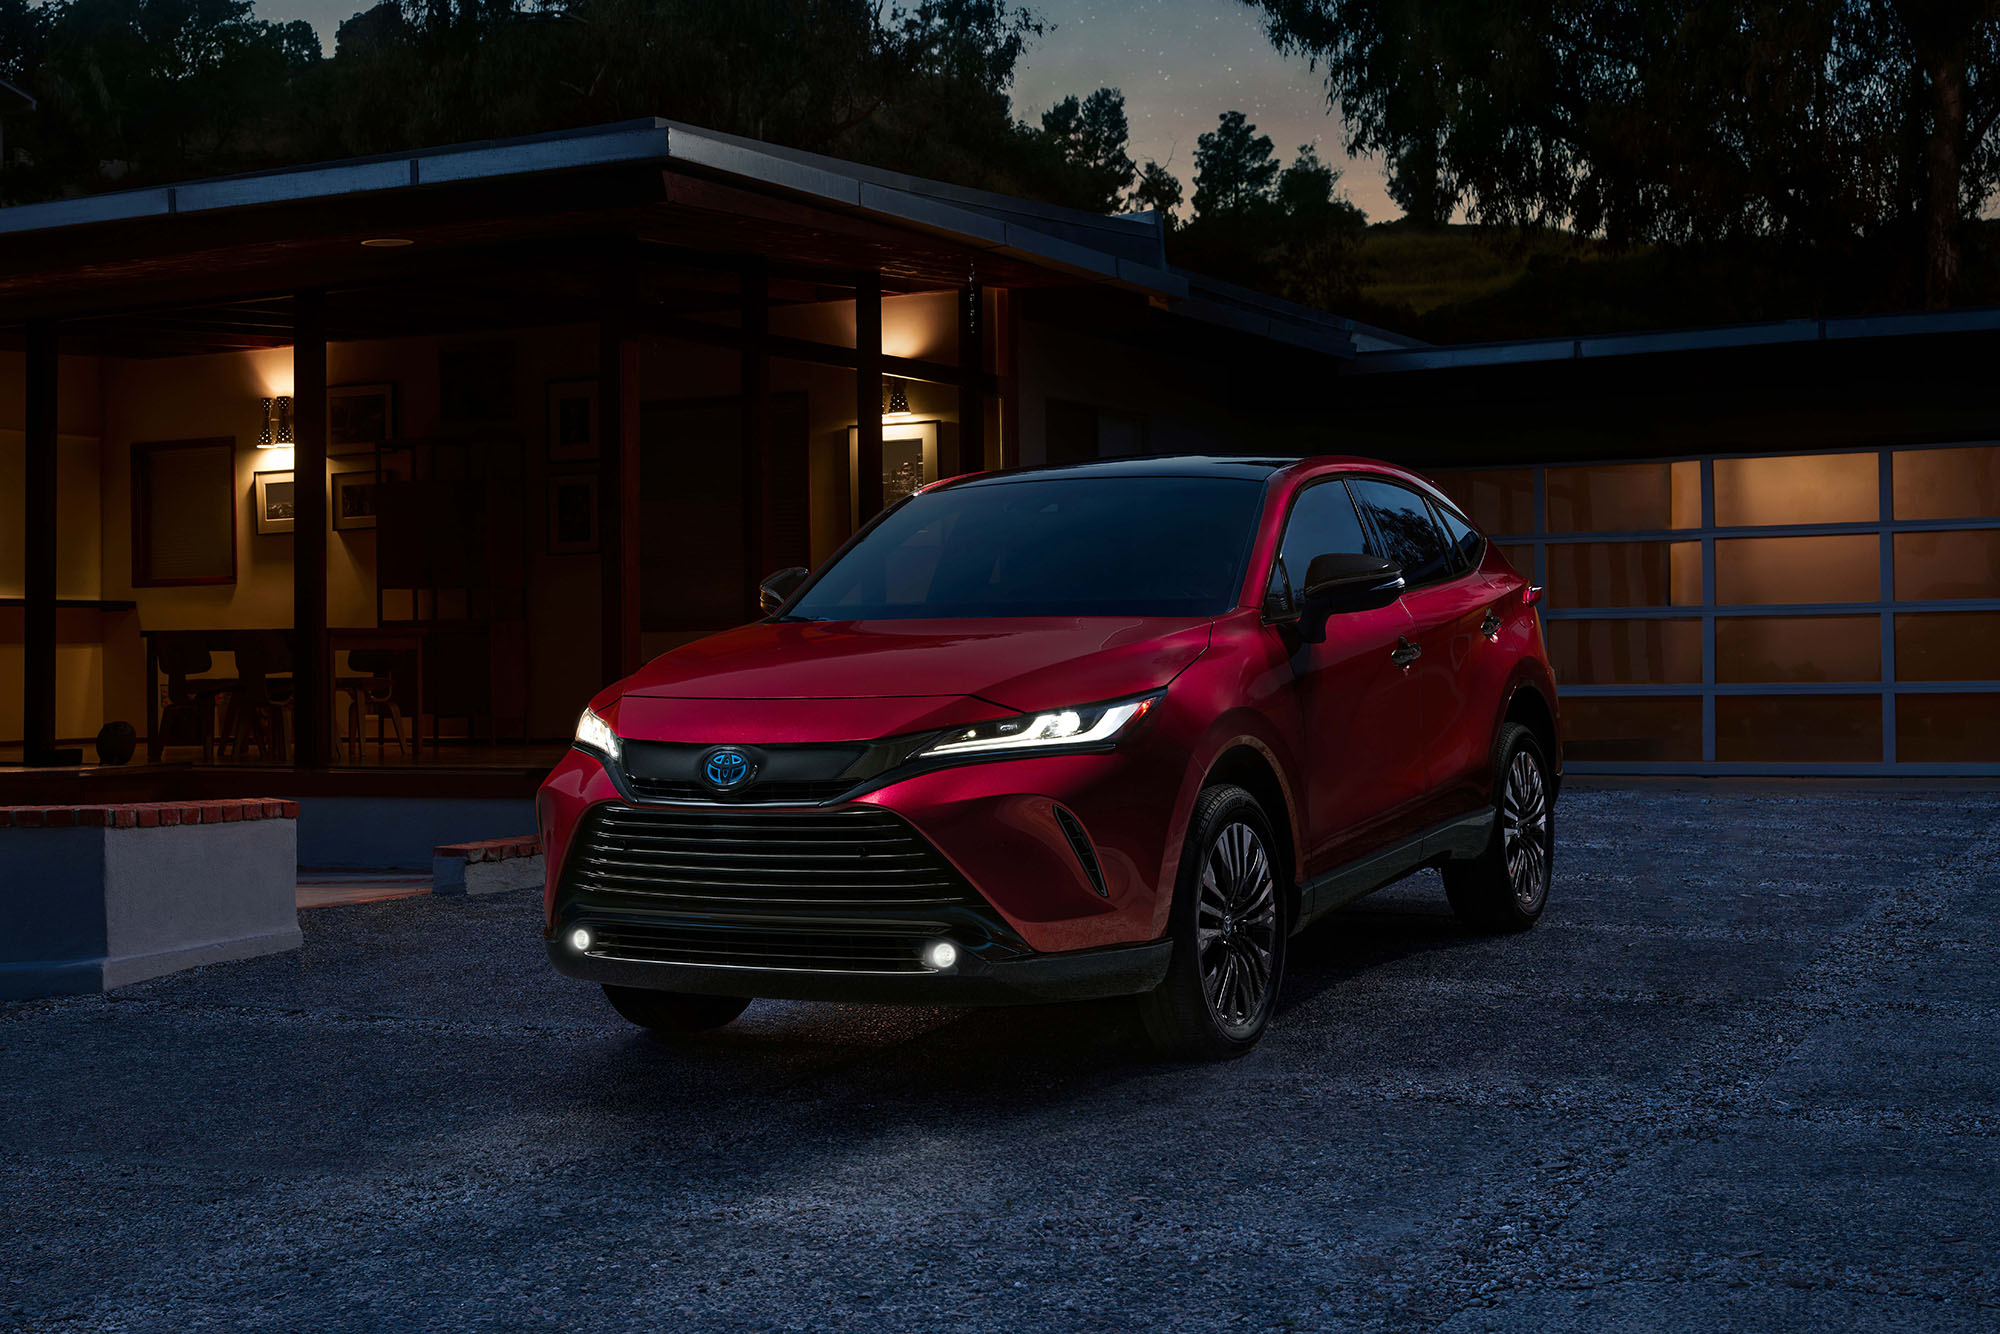 2023 Toyota Venza Nightshade Edition in red